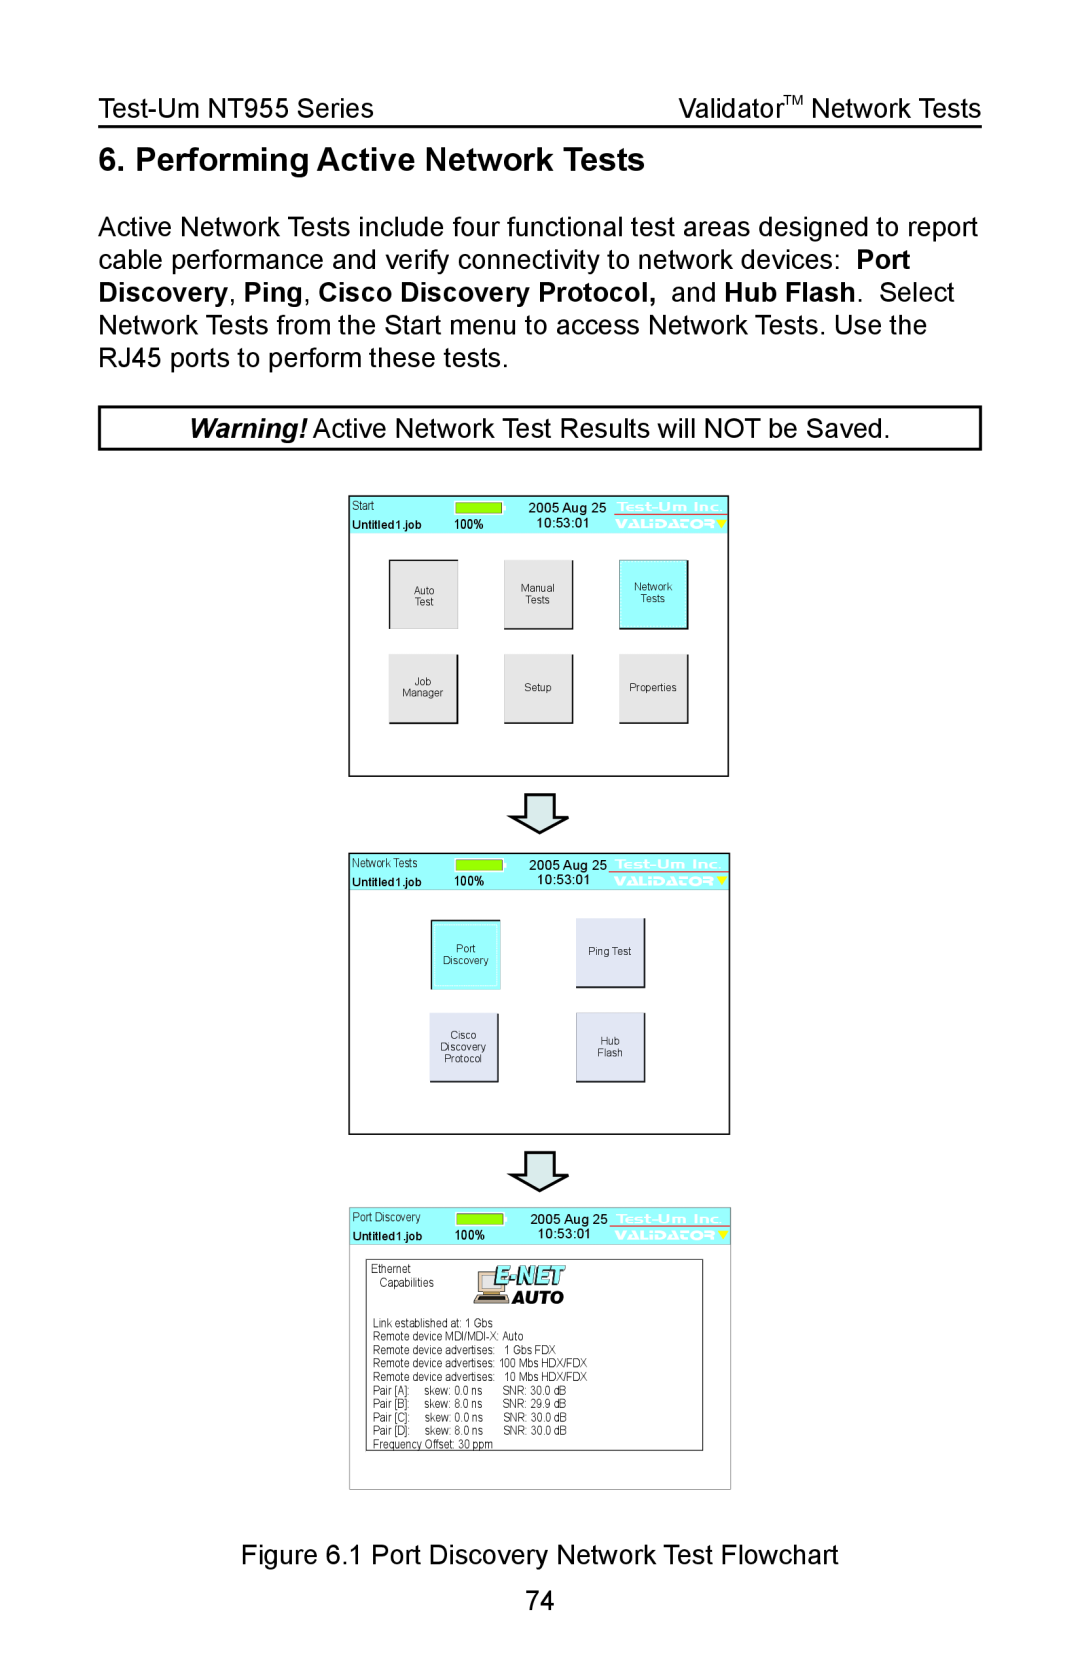 Test-Um NT955 operating instructions Performing Active Network Tests, E -Net, Auto, Ethernet, Capabilities 